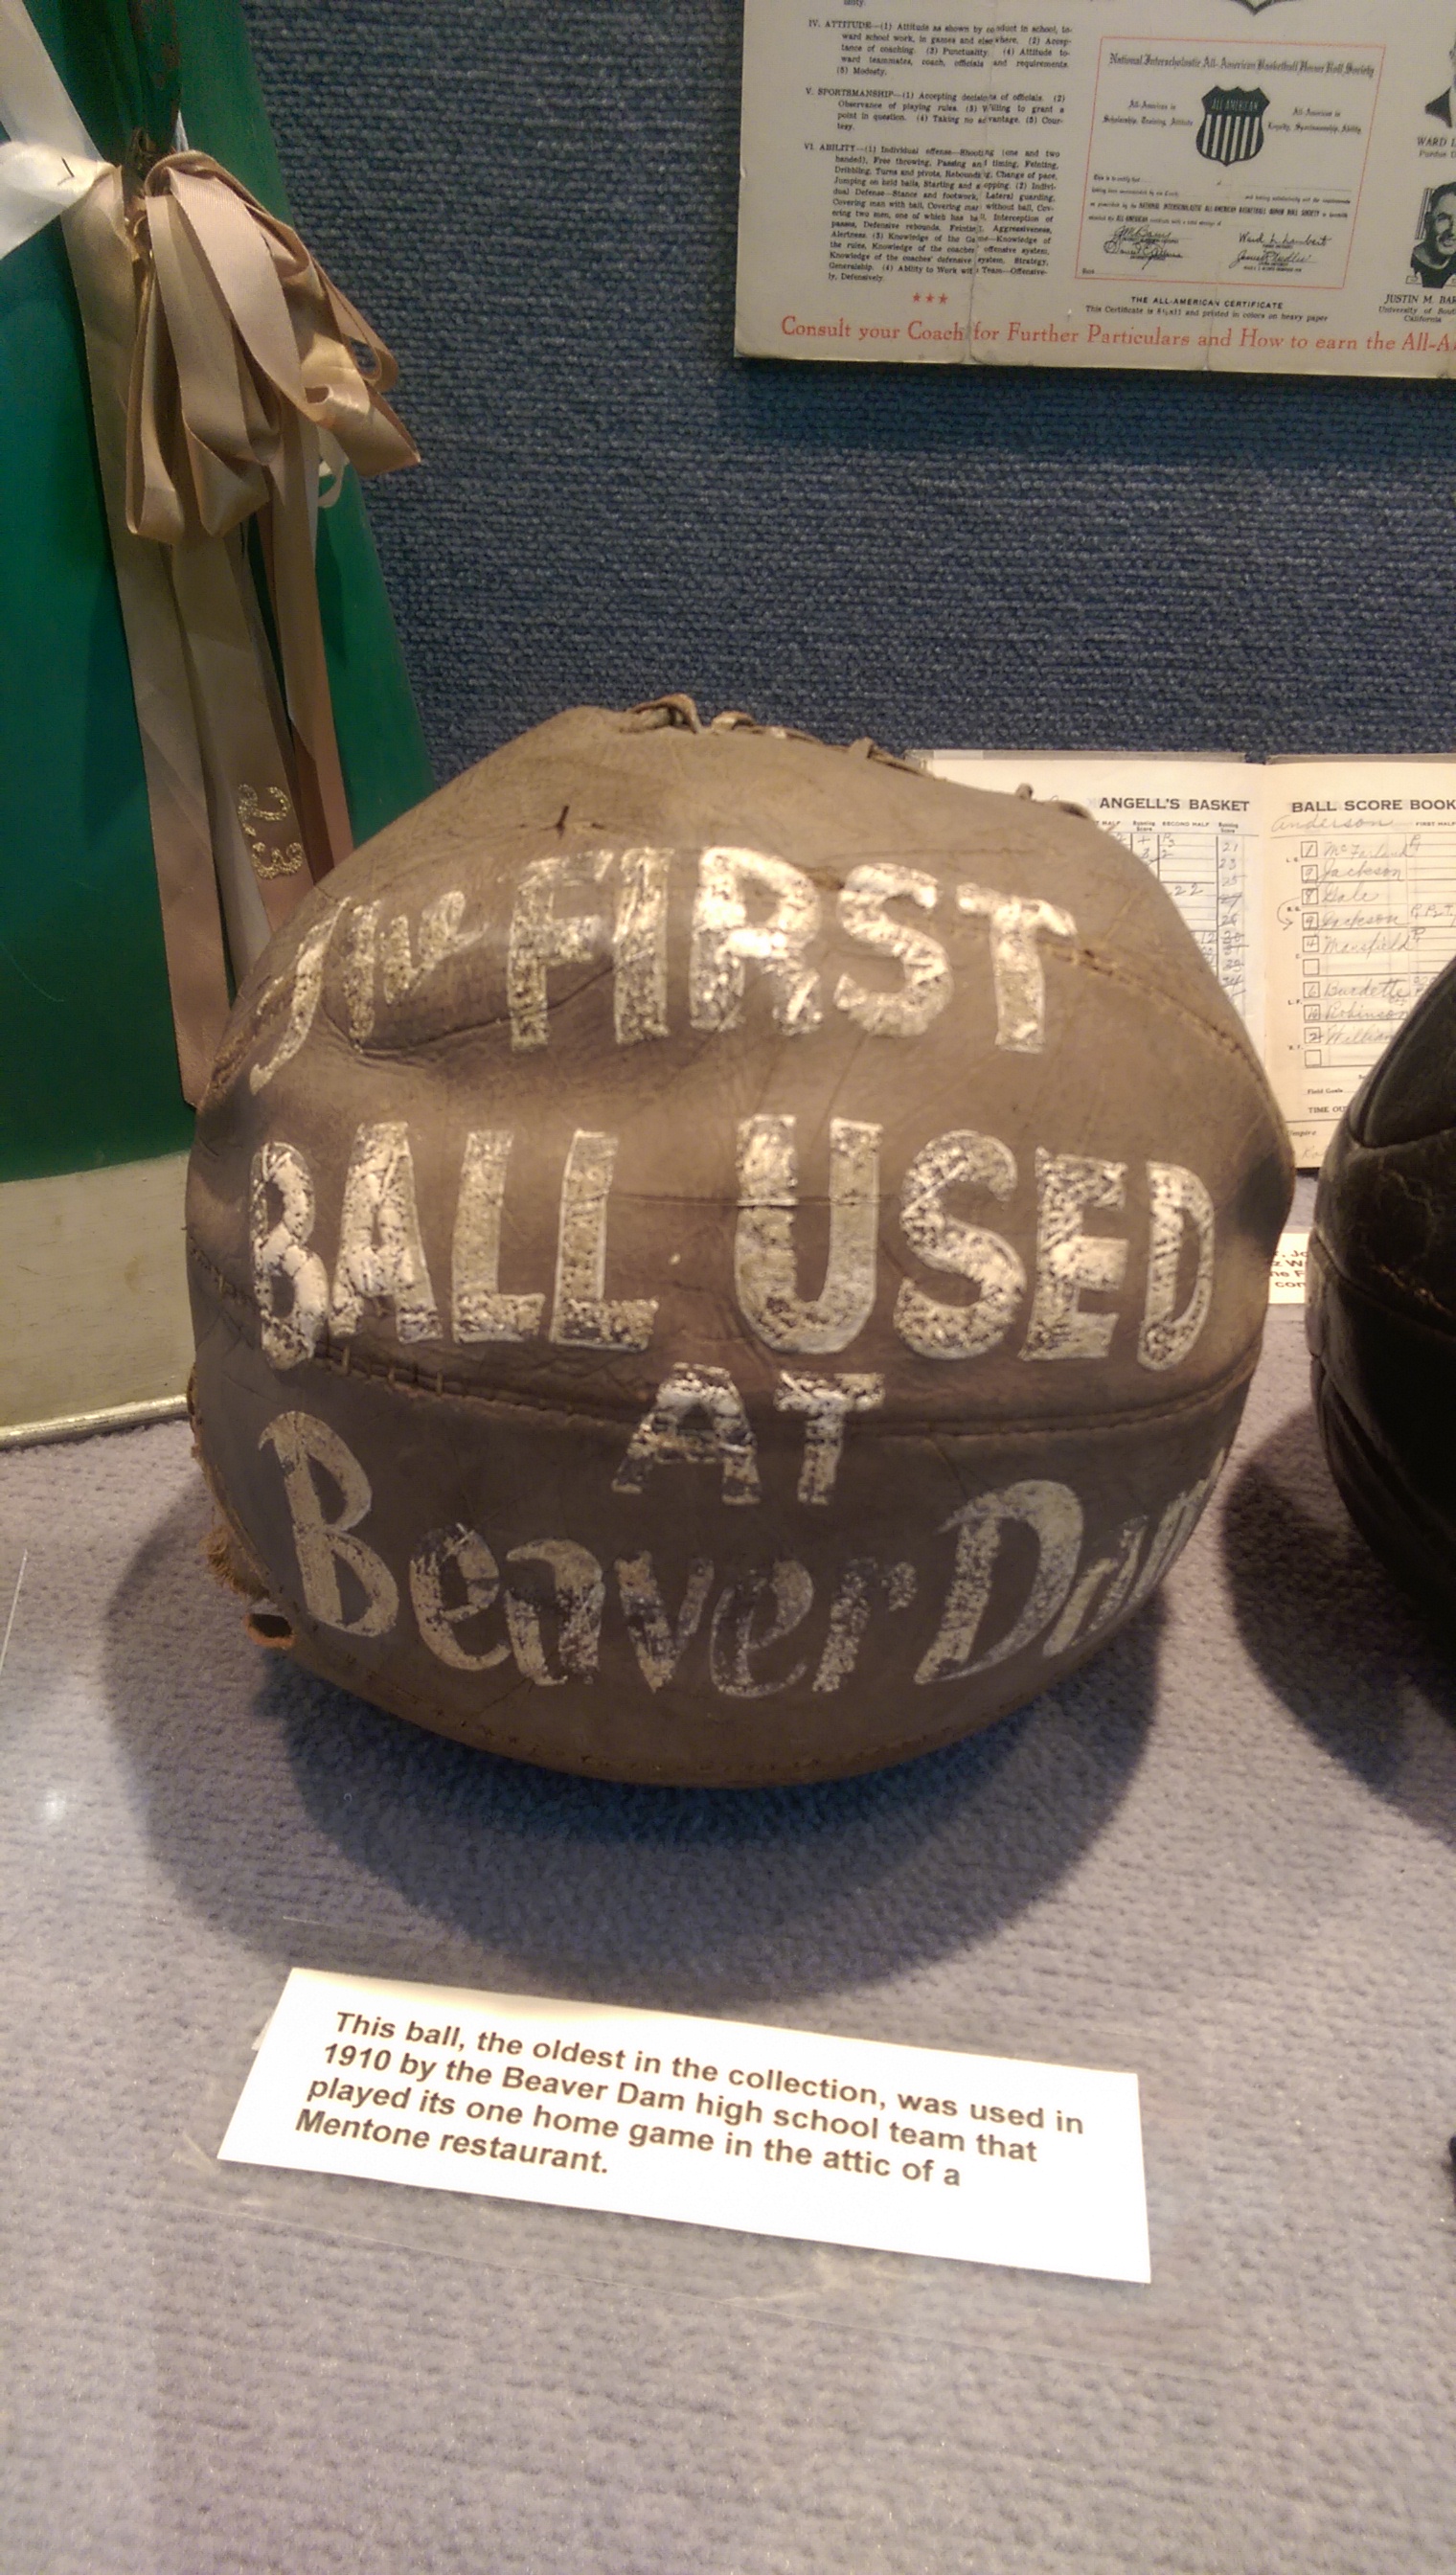 The first basketballs were meant to be thrown, not dribbled. This ball, used in 1910 at Beaver Dam High School in Akron, is the oldest in the Hall of Fame’s collection.